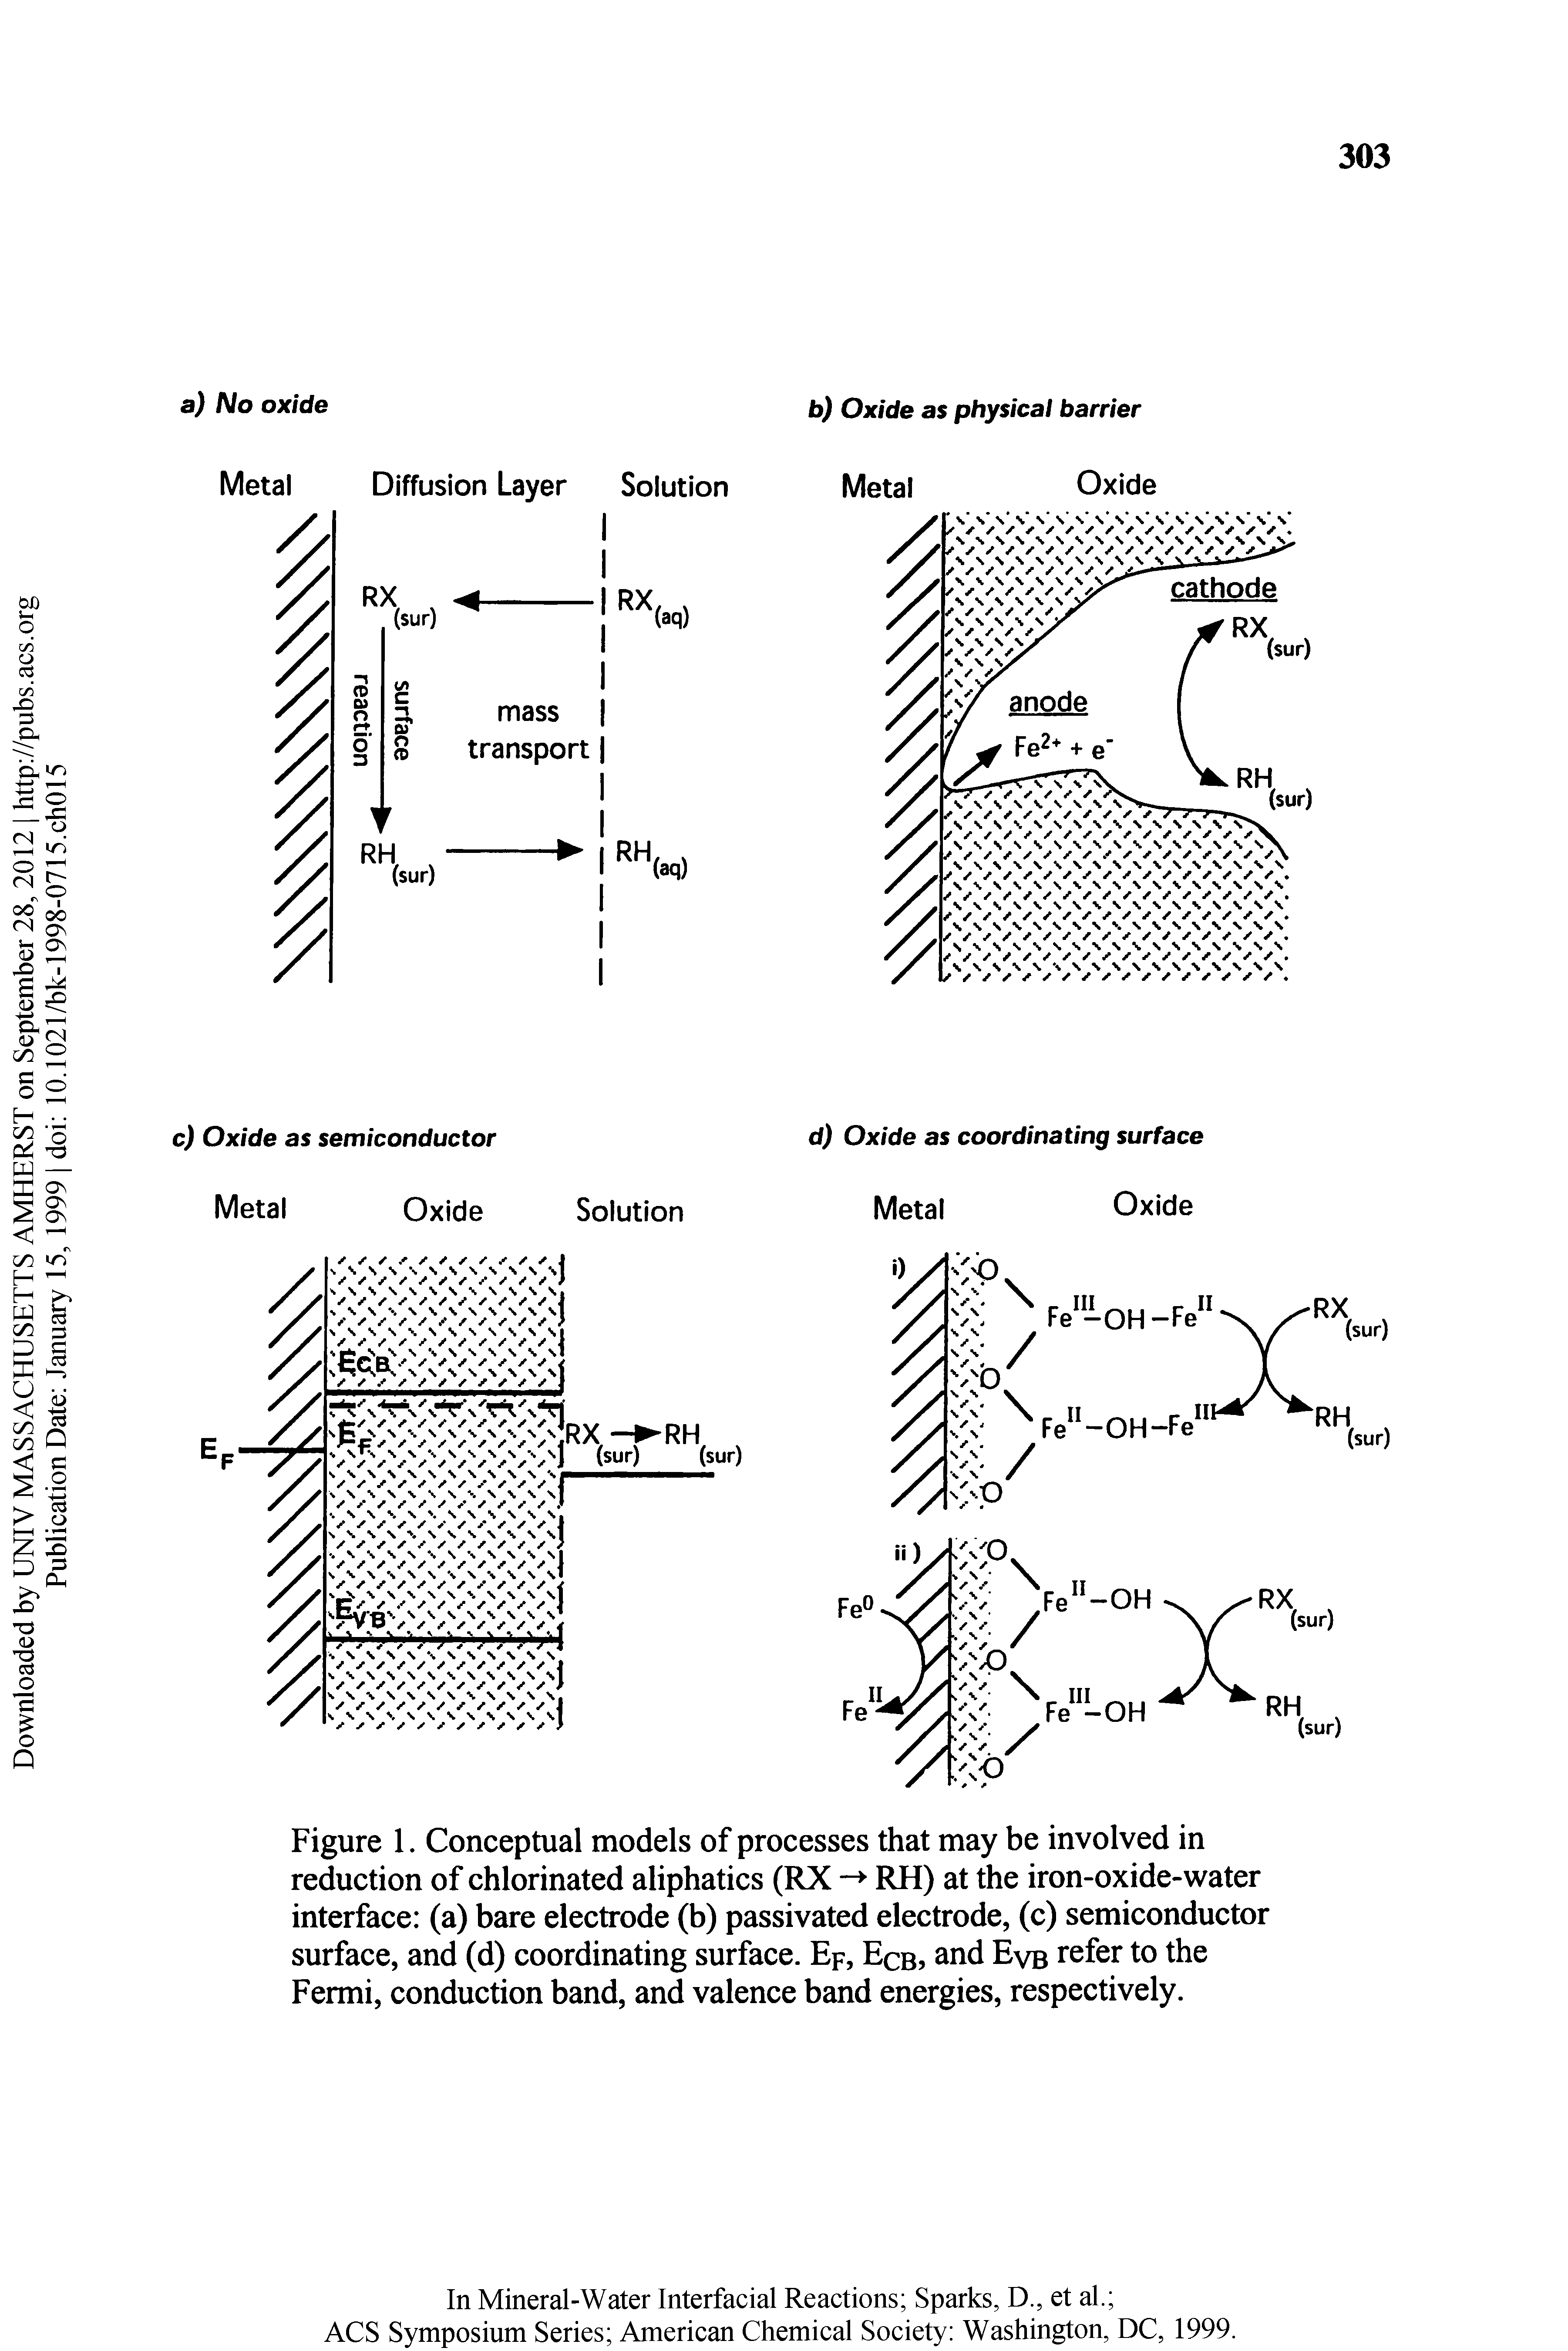 Figure 1. Conceptual models of processes that may be involved in reduction of chlorinated aliphatics (RX - RH) at the iron-oxide-water interface (a) bare electrode (b) passivated electrode, (c) semiconductor surface, and (d) coordinating surface. Ep, Ecb and Evb refer to the Fermi, conduction band, and valence band energies, respectively.